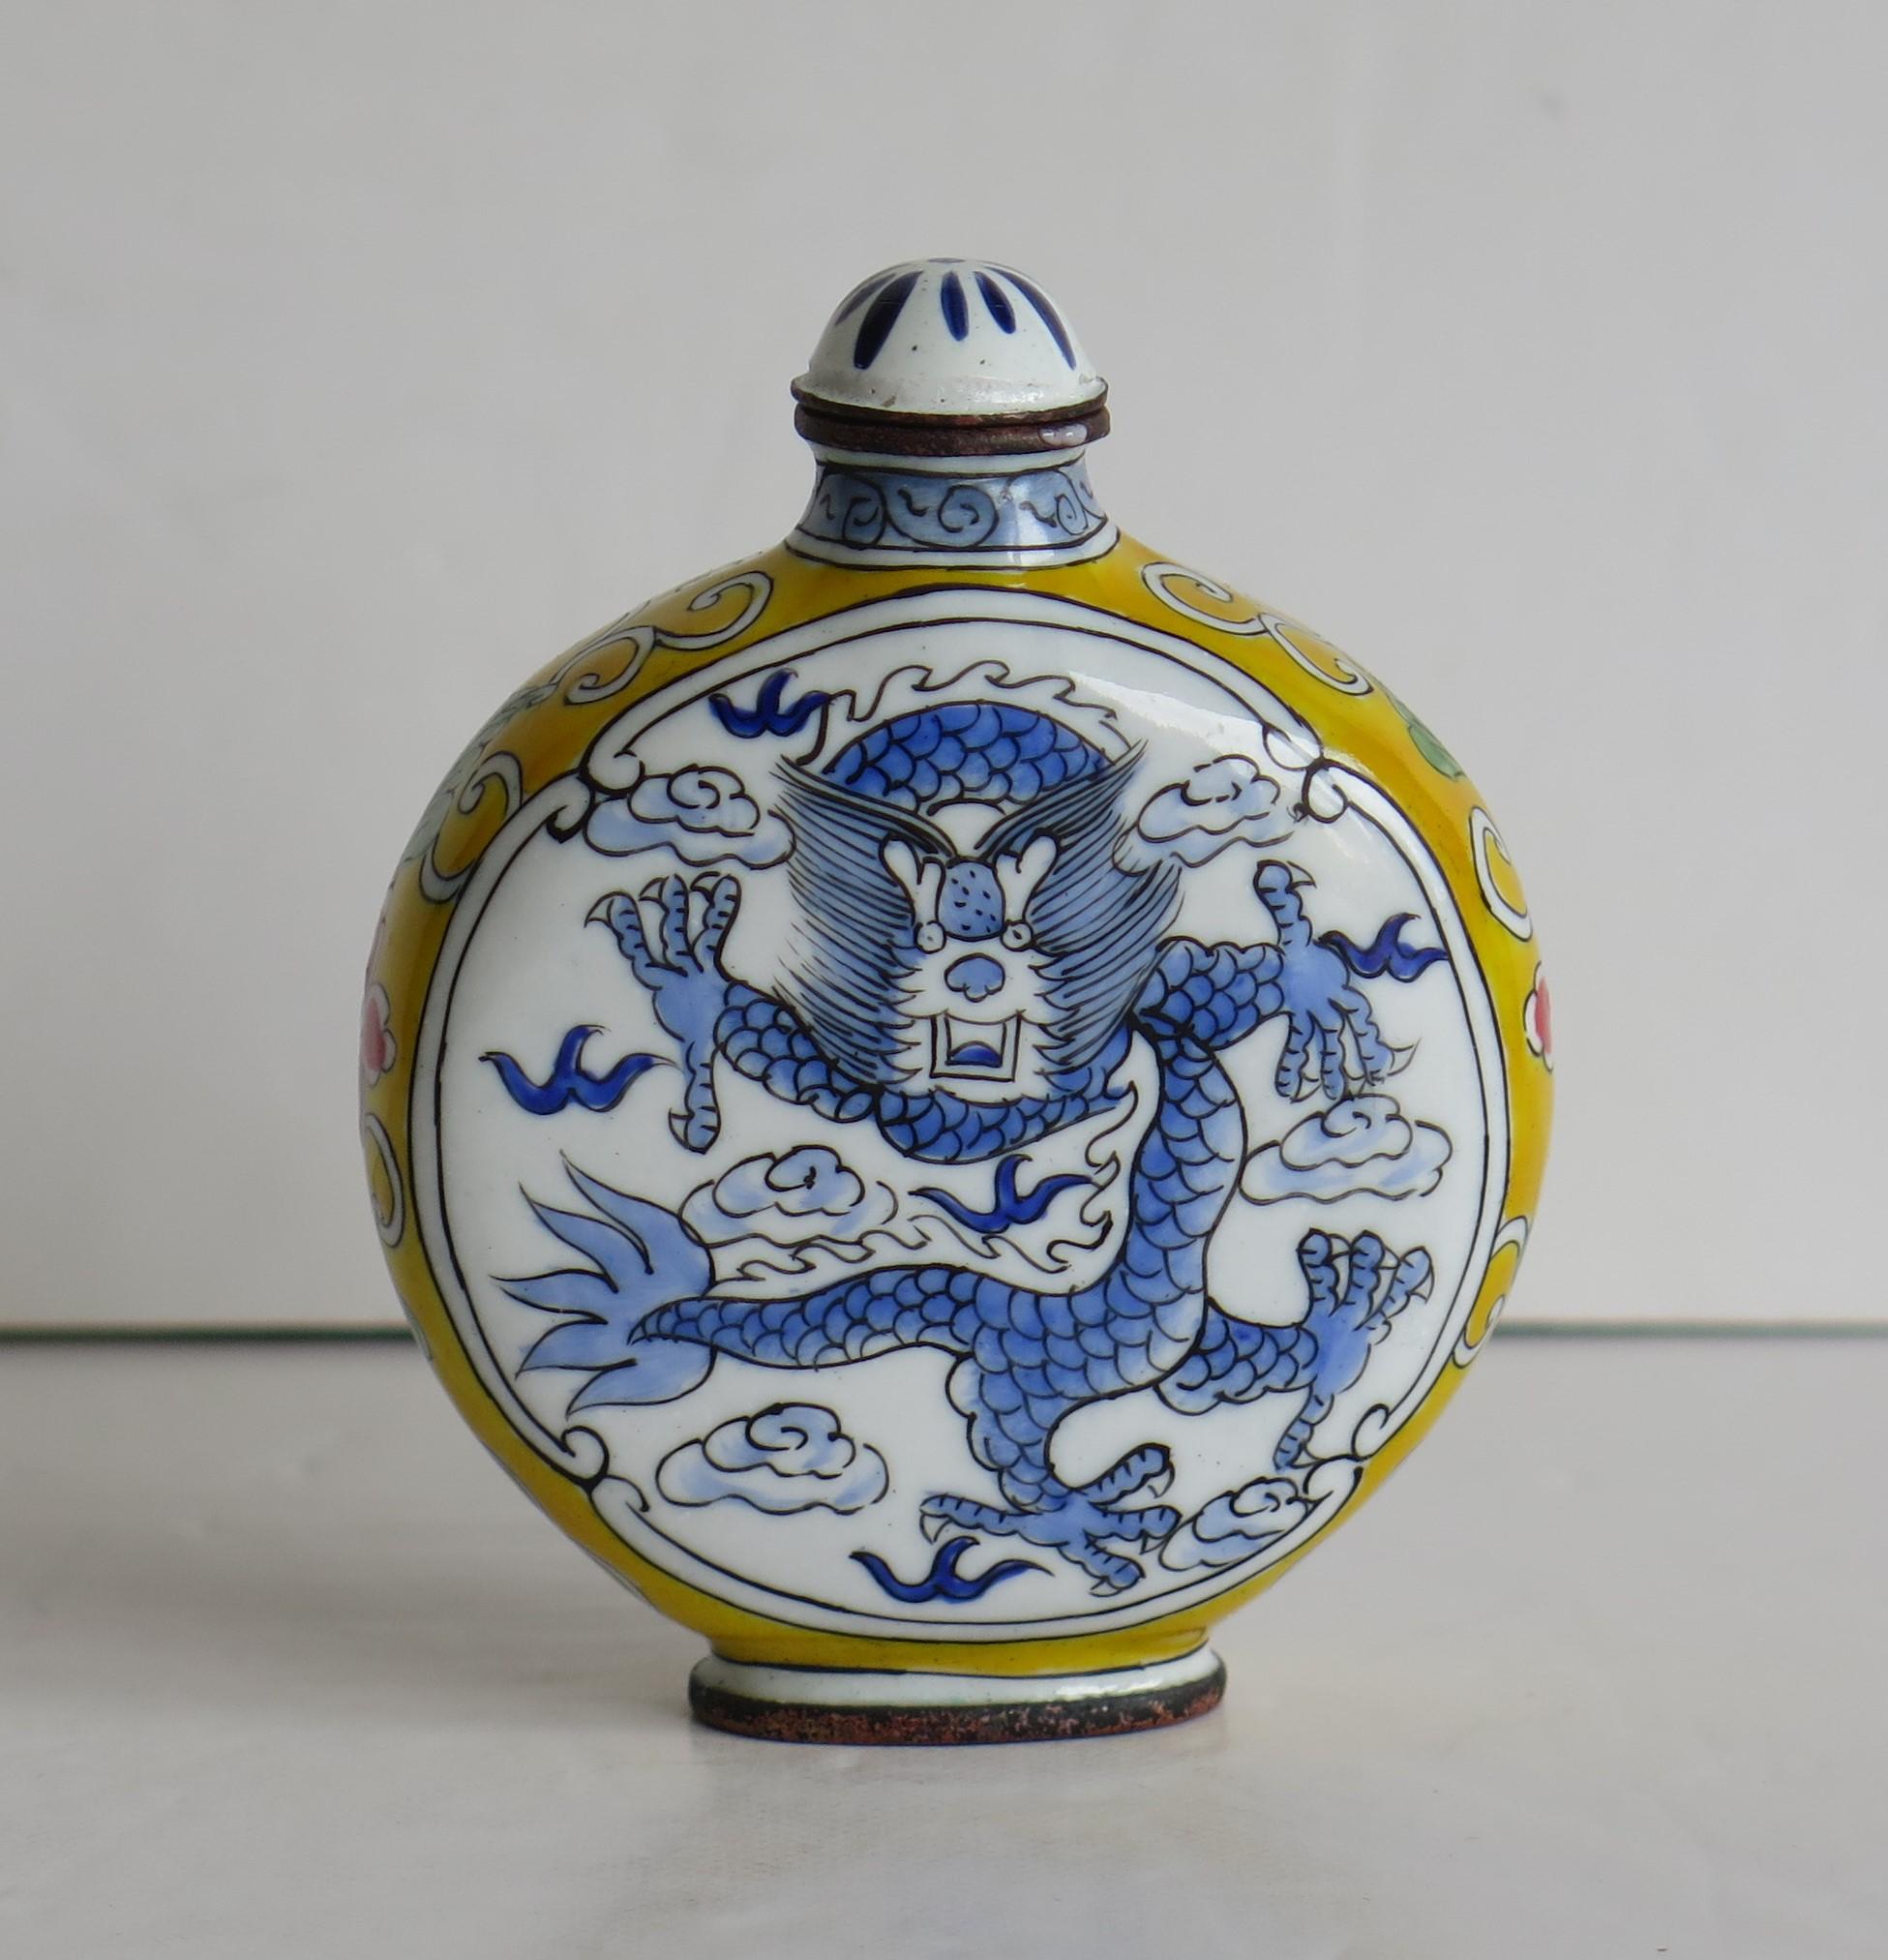 Enameled Chinese Snuff Bottle Hand Enamelled Dragon on Copper 4-Cha'r Mark, circa 1940s